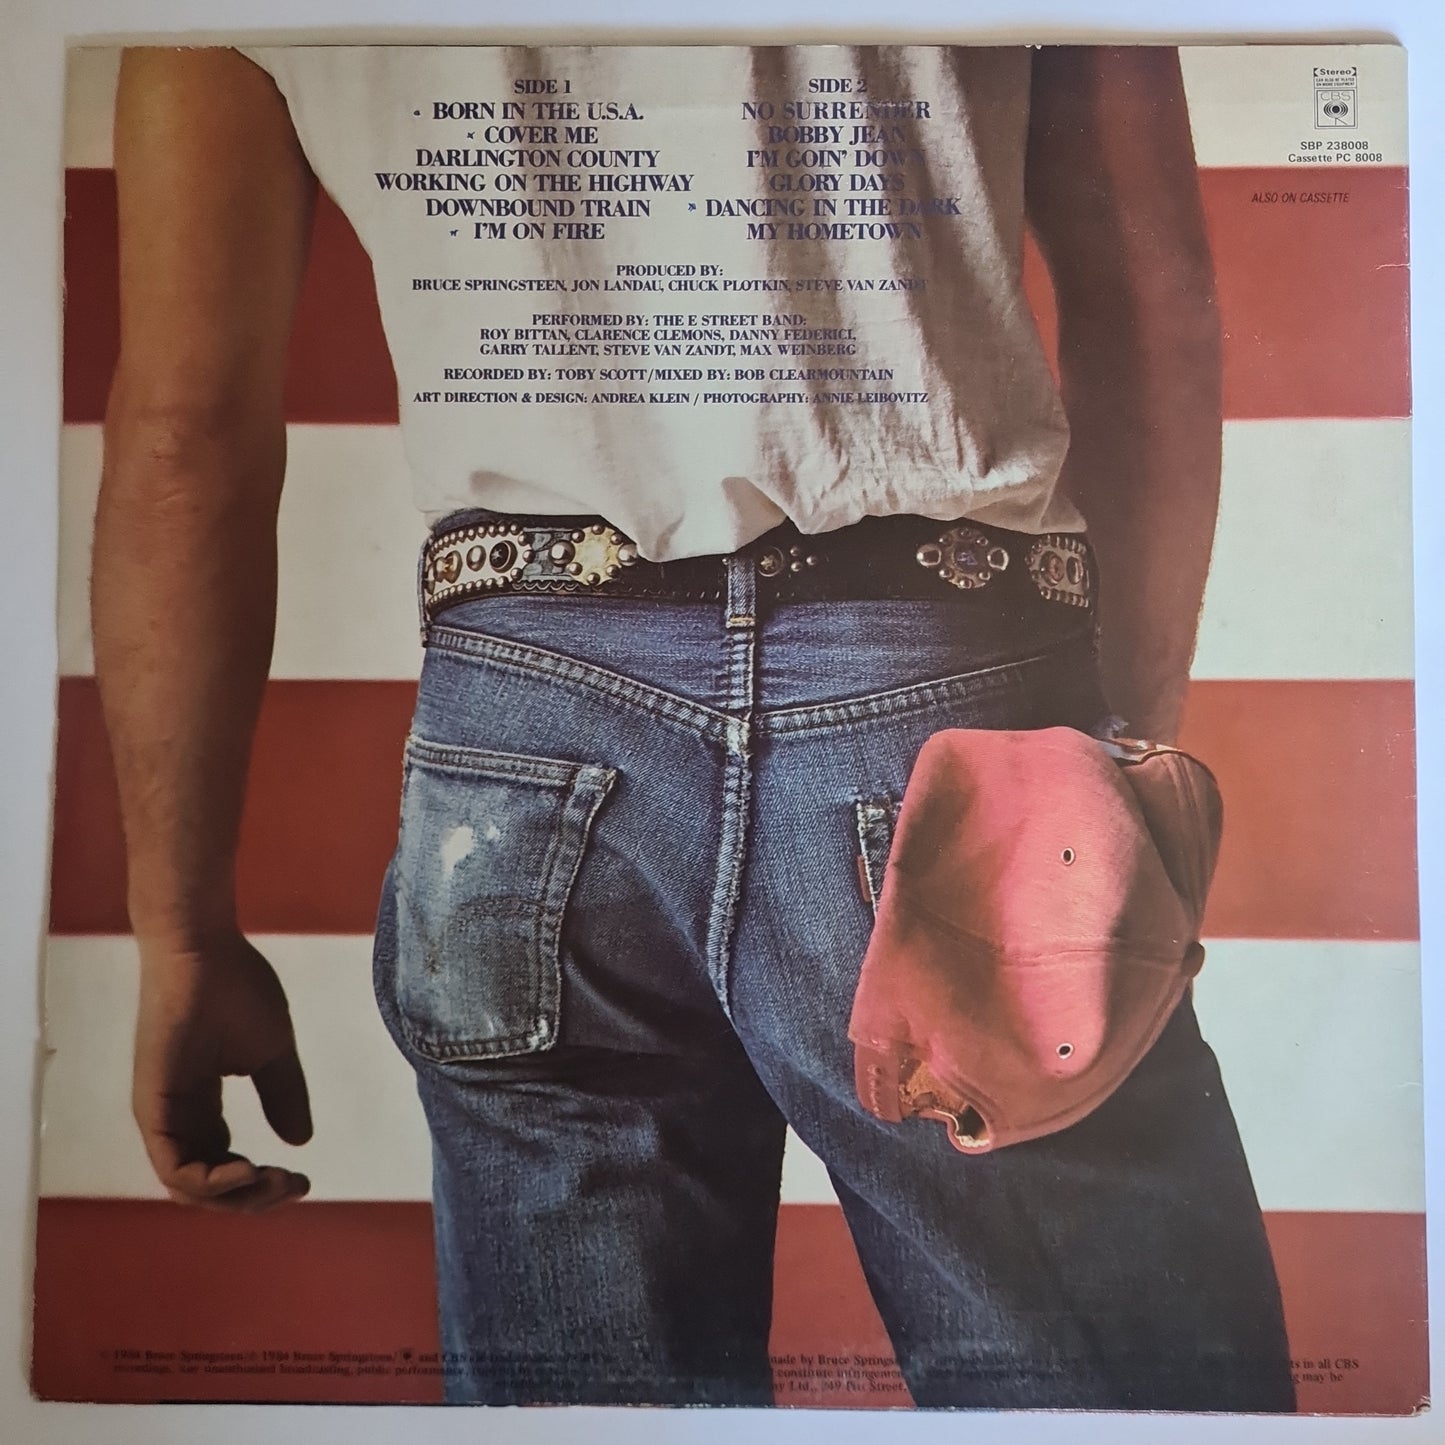 Bruce Springsteen – Born In The USA - 1984